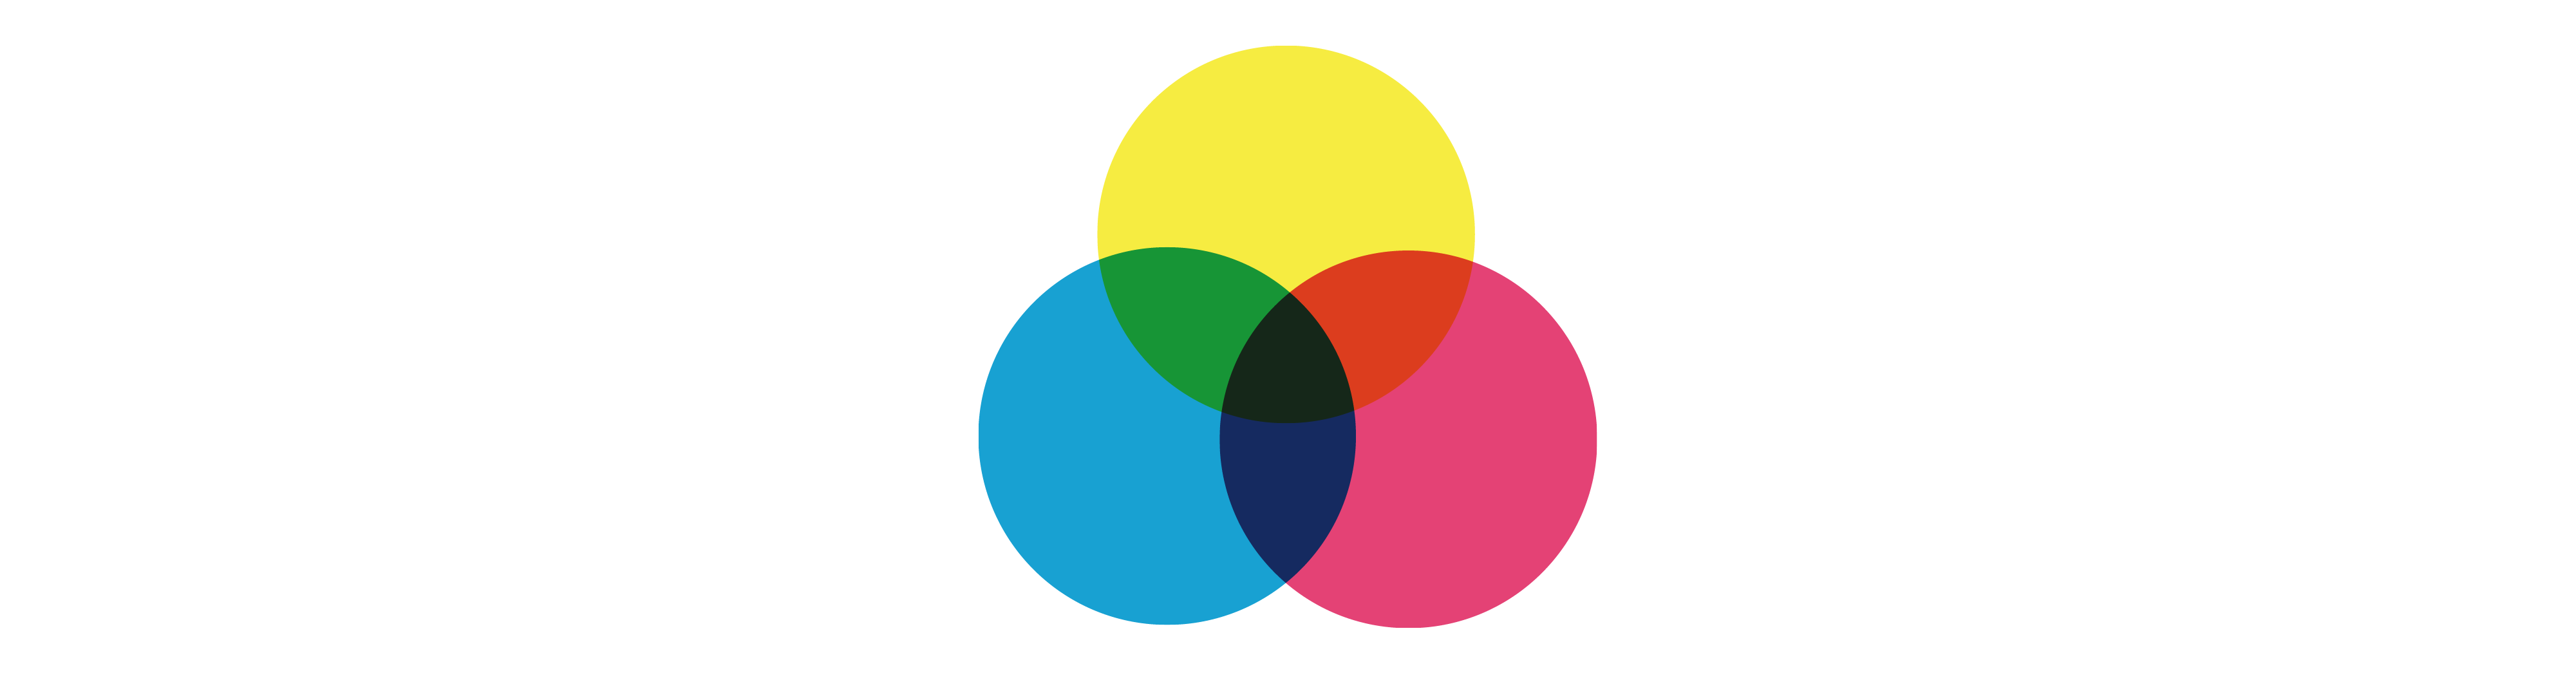 3 overlapping circles– 1 is red, 1 is yellow, and 1 is blue. The blue and red circles overlap and make a small area of violet, the red and yellow circles overlap and make an area of orange, and the blue and yellow circles overlap making an area of green. Where all the circles overlap in the centre, the colour seems to be a very dark brownish-black.